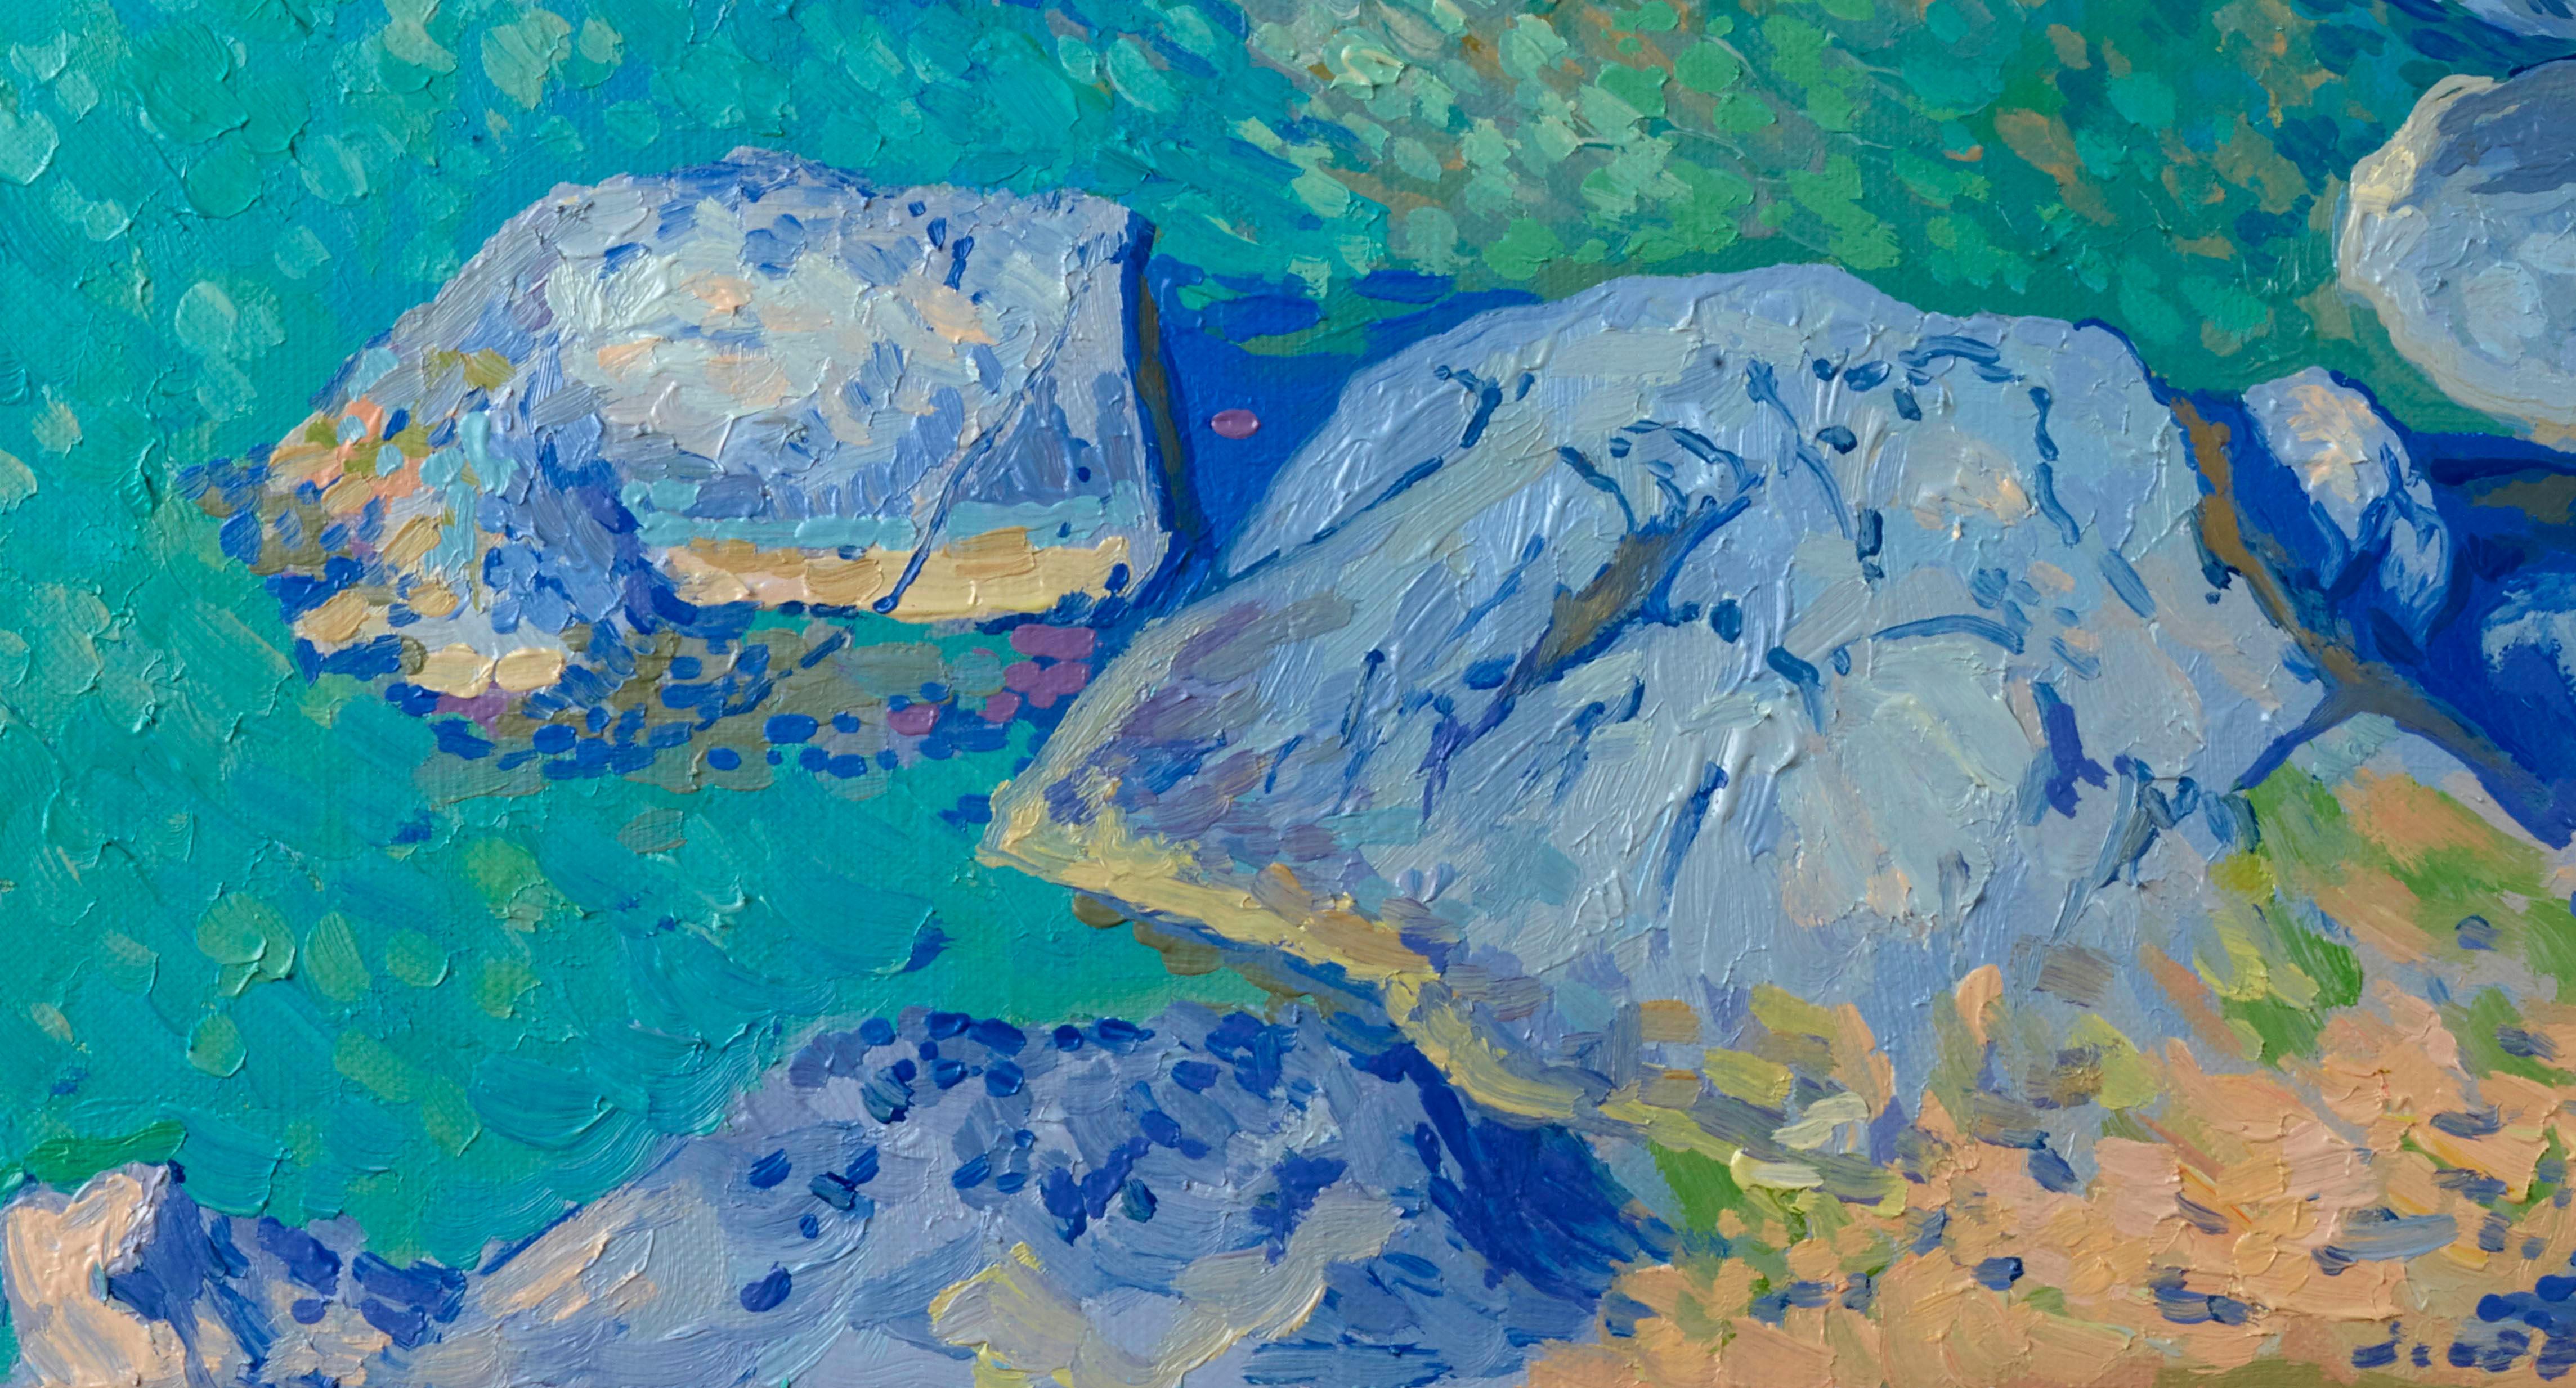 Rocks by the sea - Impressionist Painting by Simon Kozhin